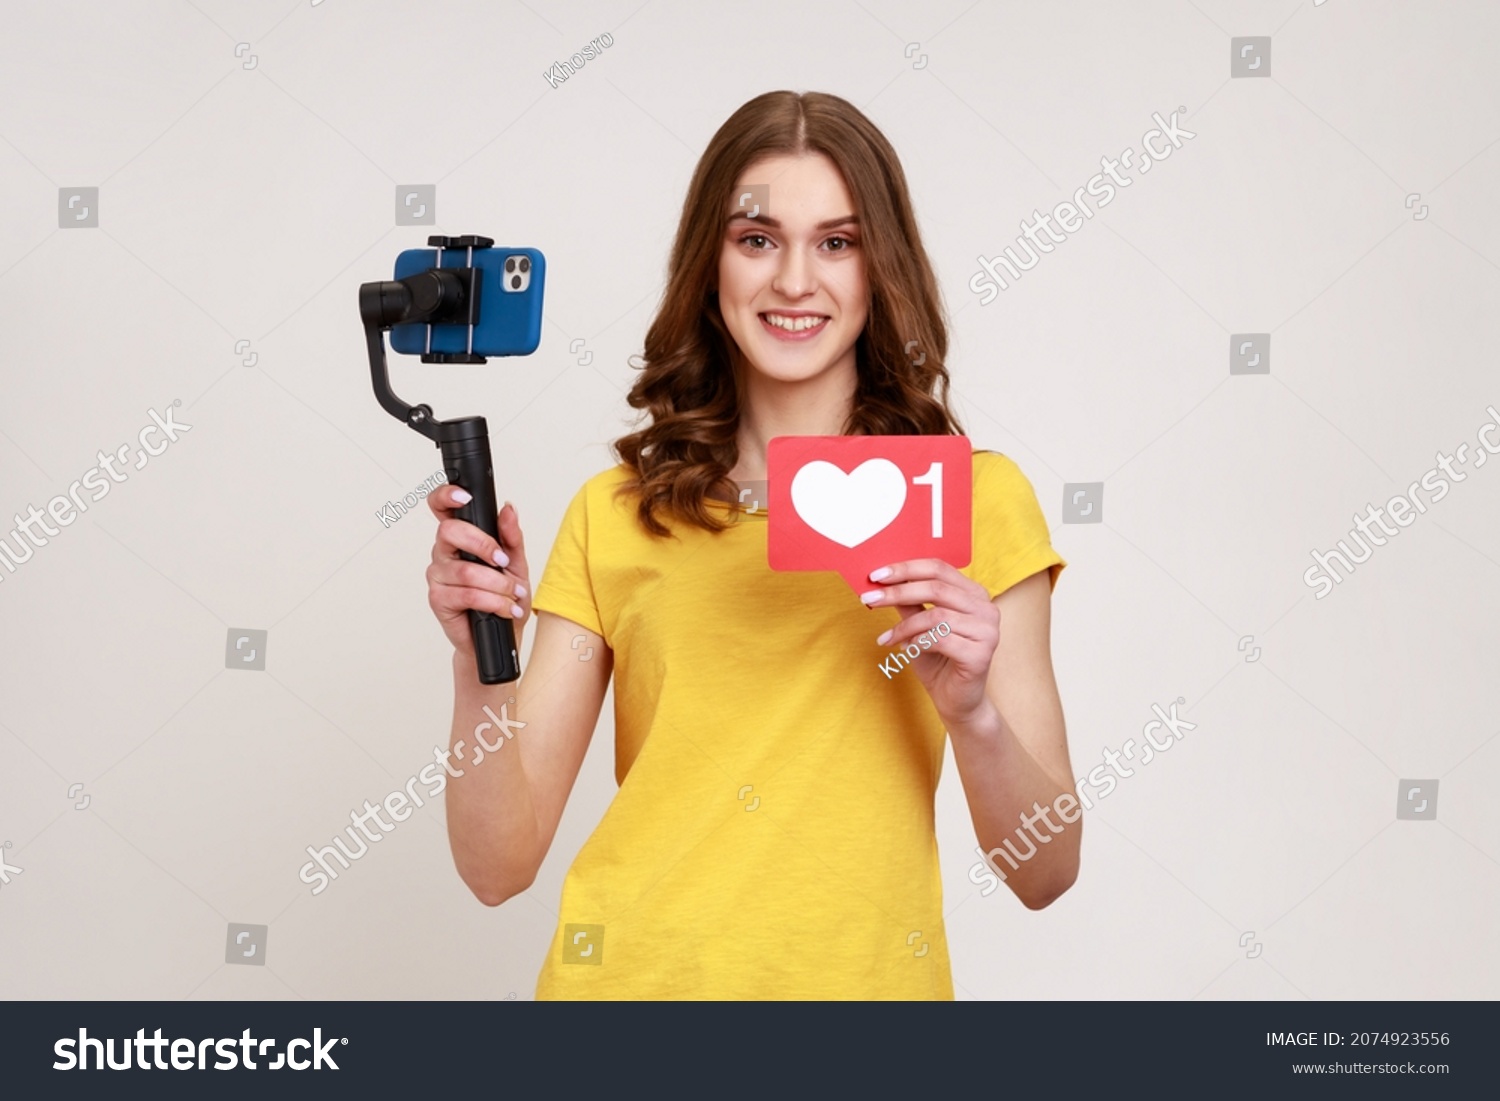 Smiling teenage girl shoots herself on electronic stabilizer for video shooting on phone, broadcasting livestream, showing like icon. Indoor studio shot isolated on gray background. #2074923556